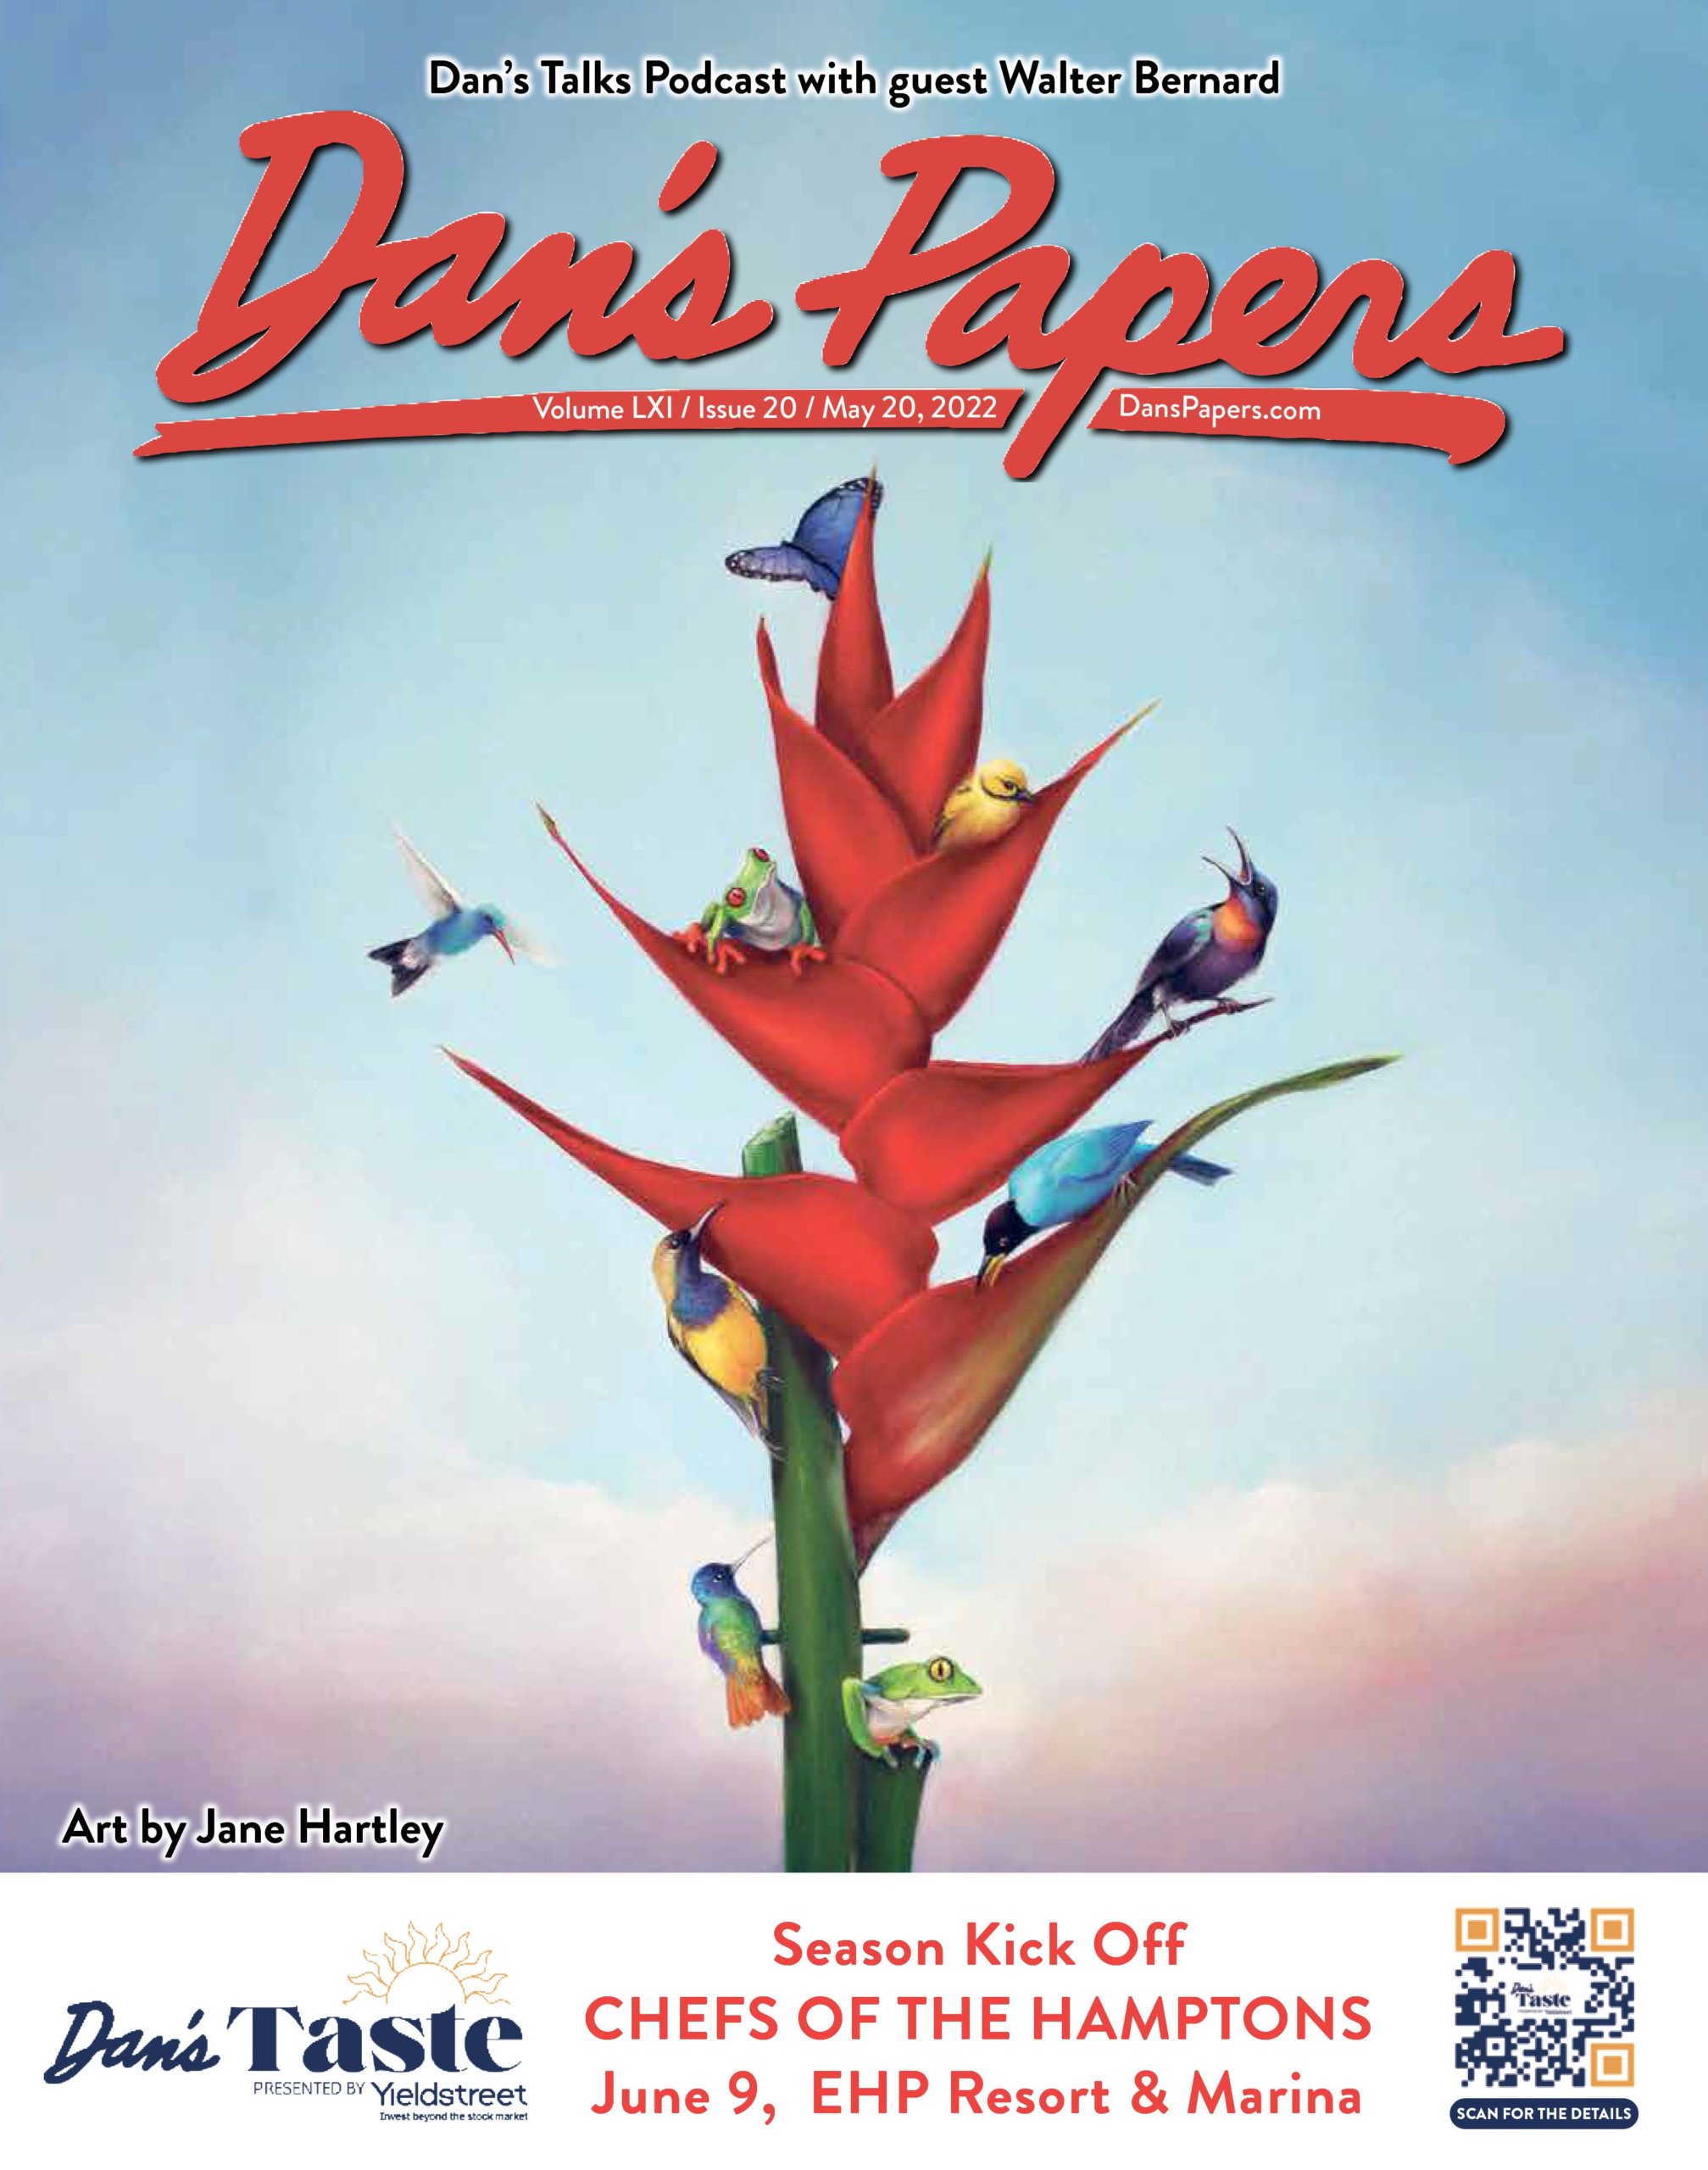 May 20, 2022 Dan's Papers cover art, "Heliconia Hotel," by Jane Hartley